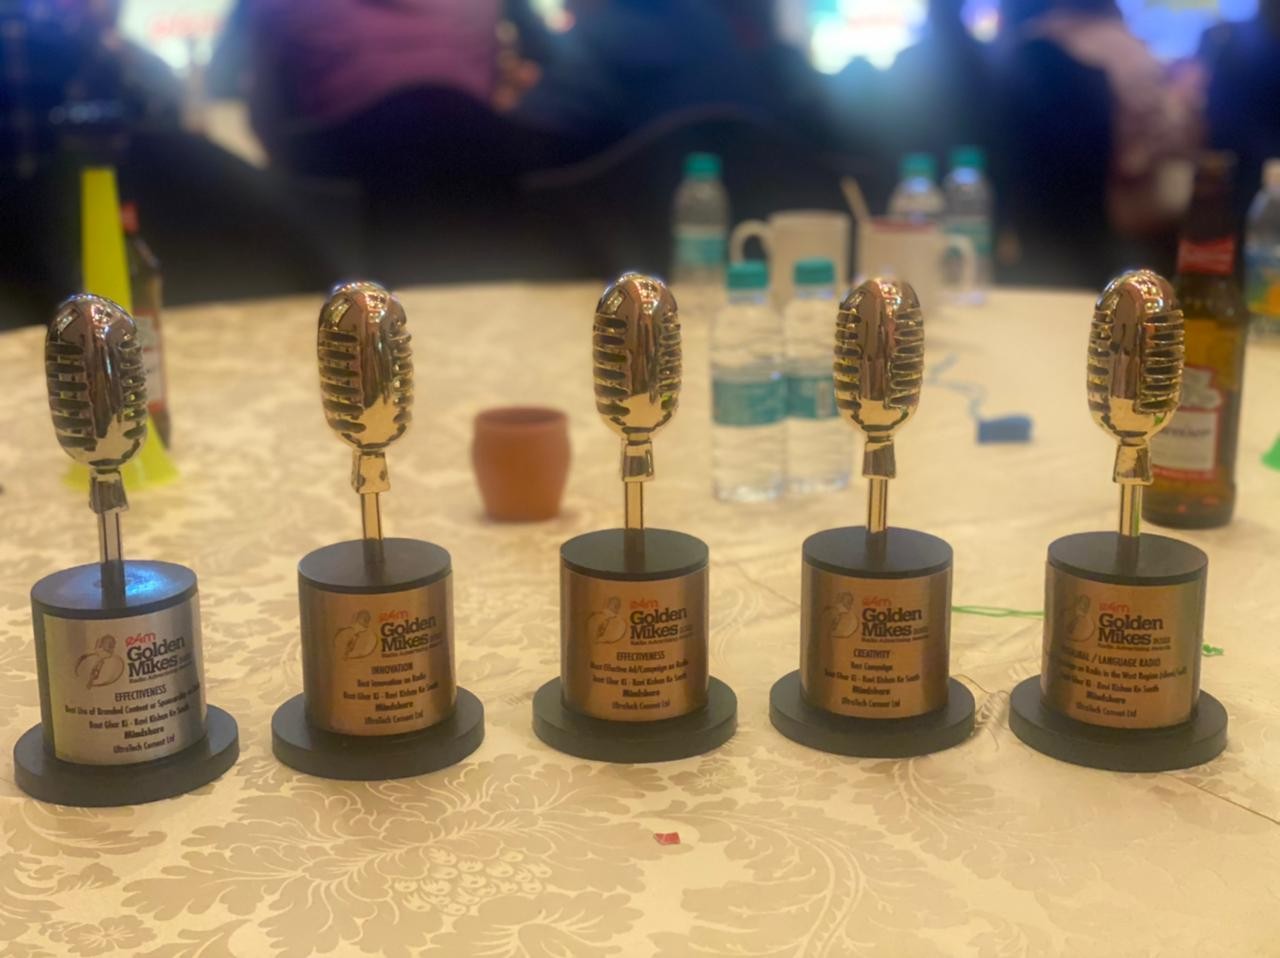 ultratech-bags-5-trophies-at-the-e4m-s-radio-advertising-awards